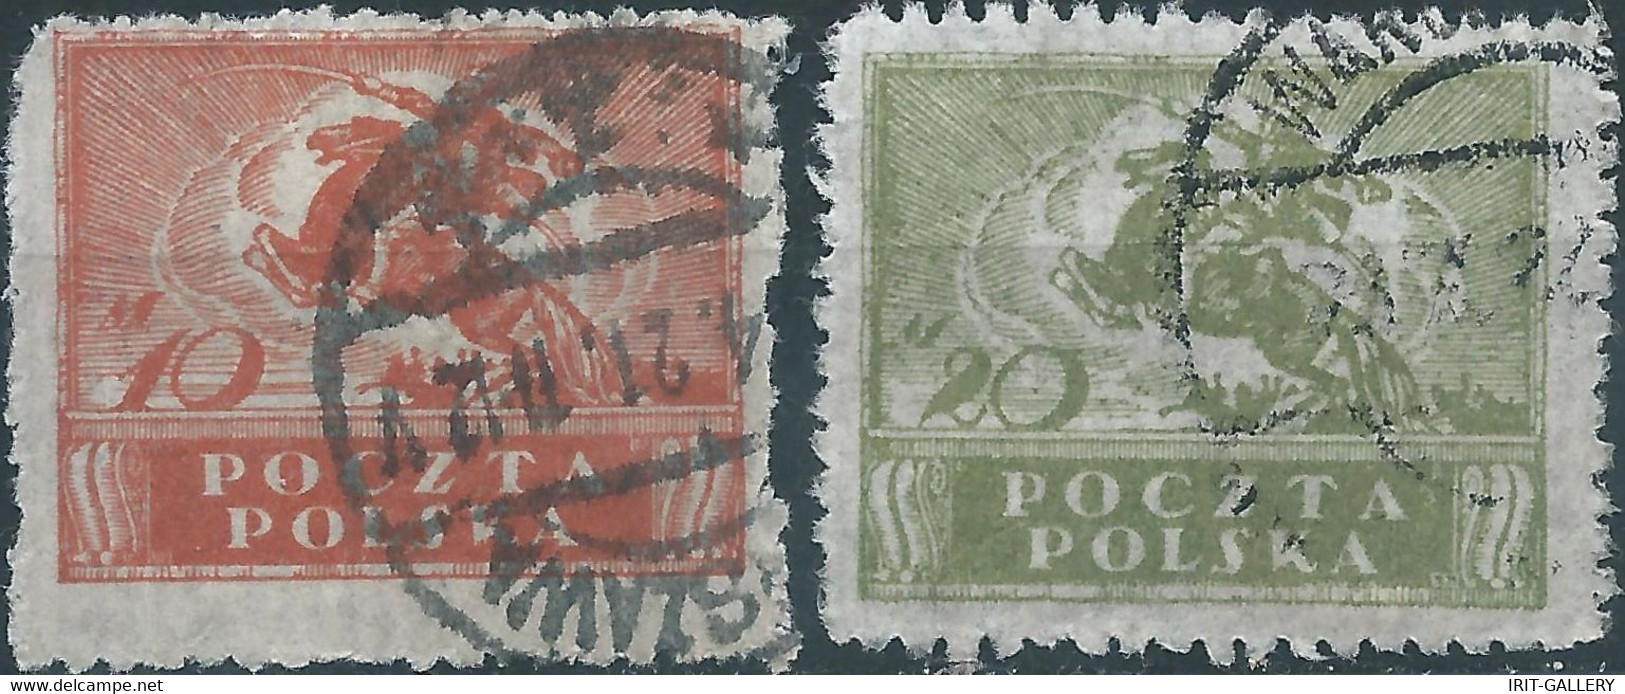 POLONIA-POLAND-POLSKA,1919 South And North Poland Issues -10M & 20M ,Obliterated - Gebraucht